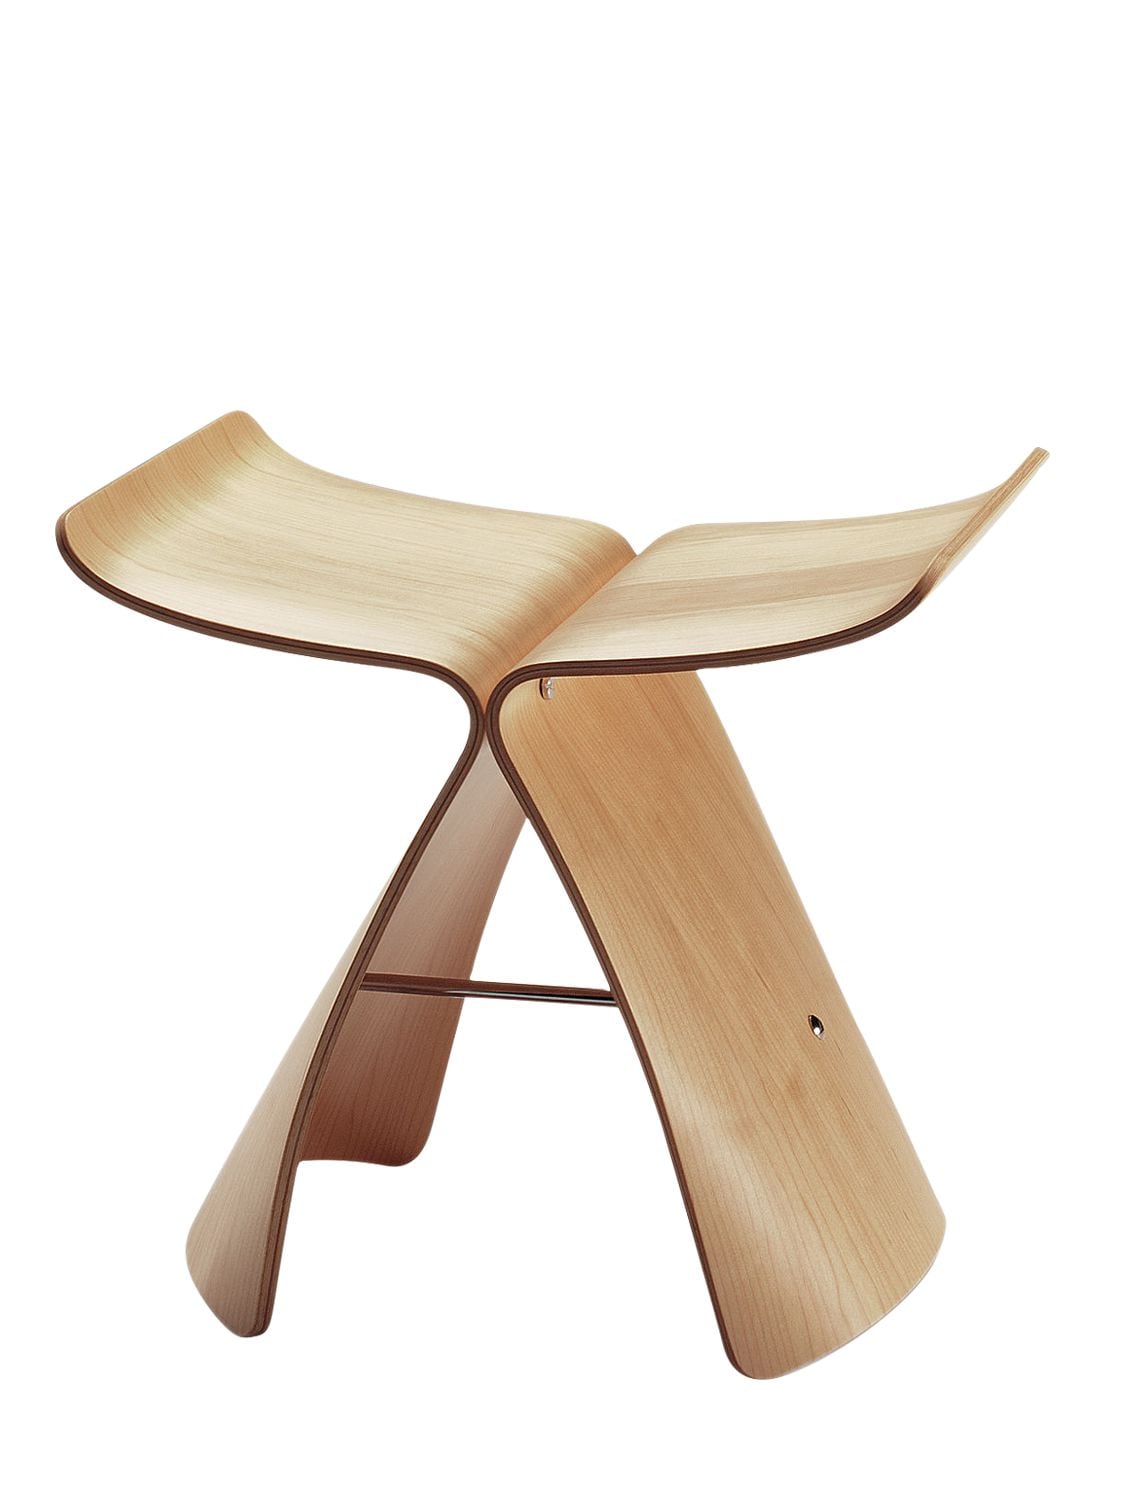 Vitra Butterfly Stool In Brown